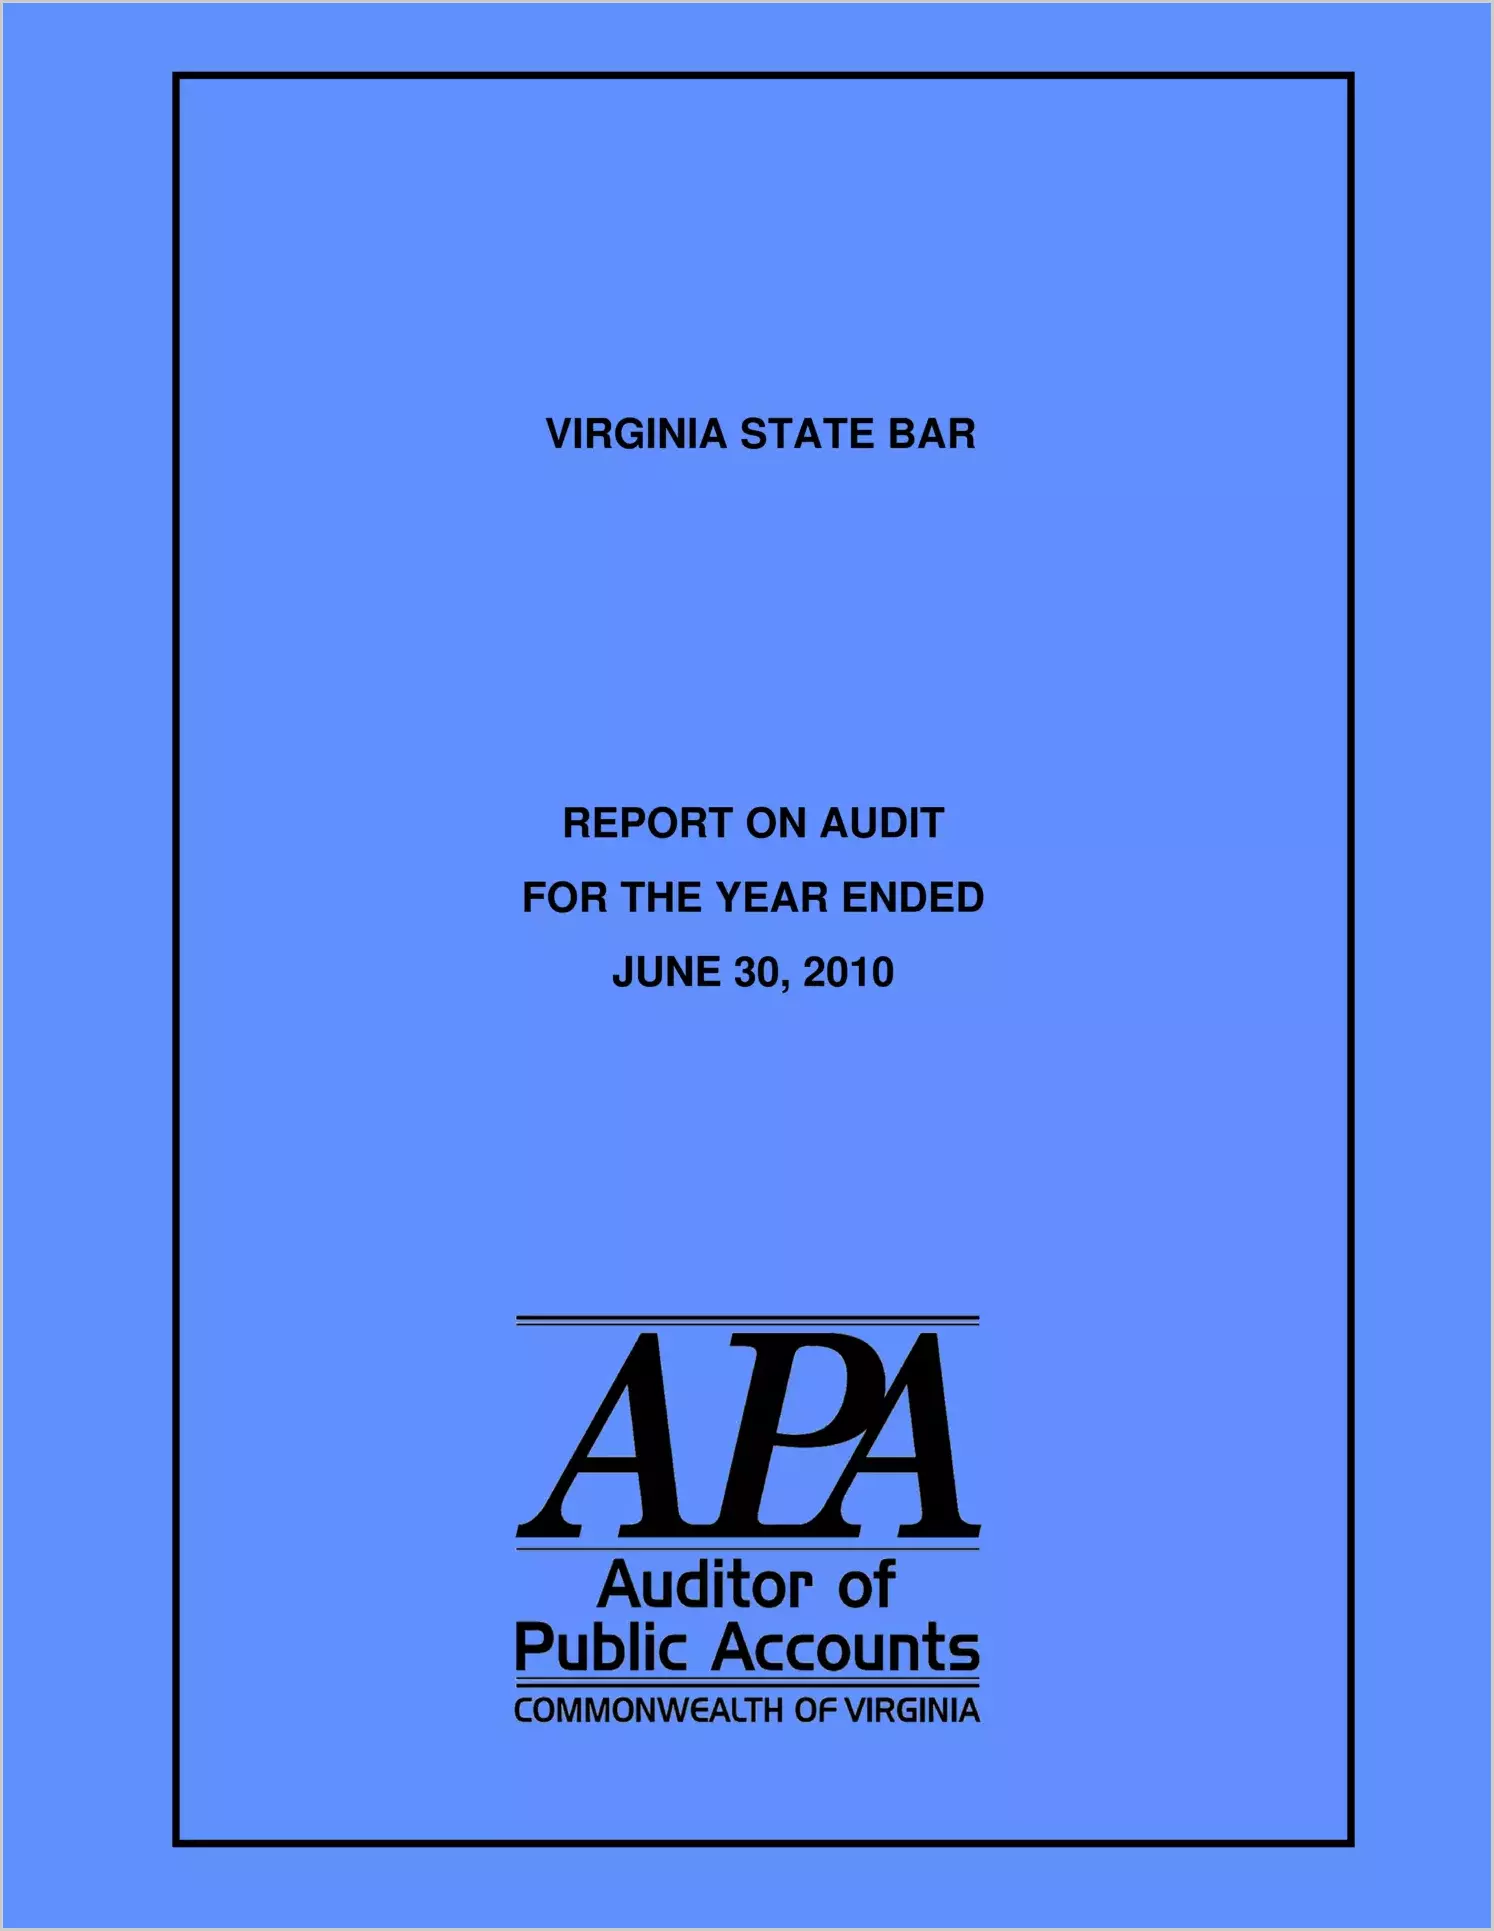 Virginia State Bar for the year ended June 30, 2010